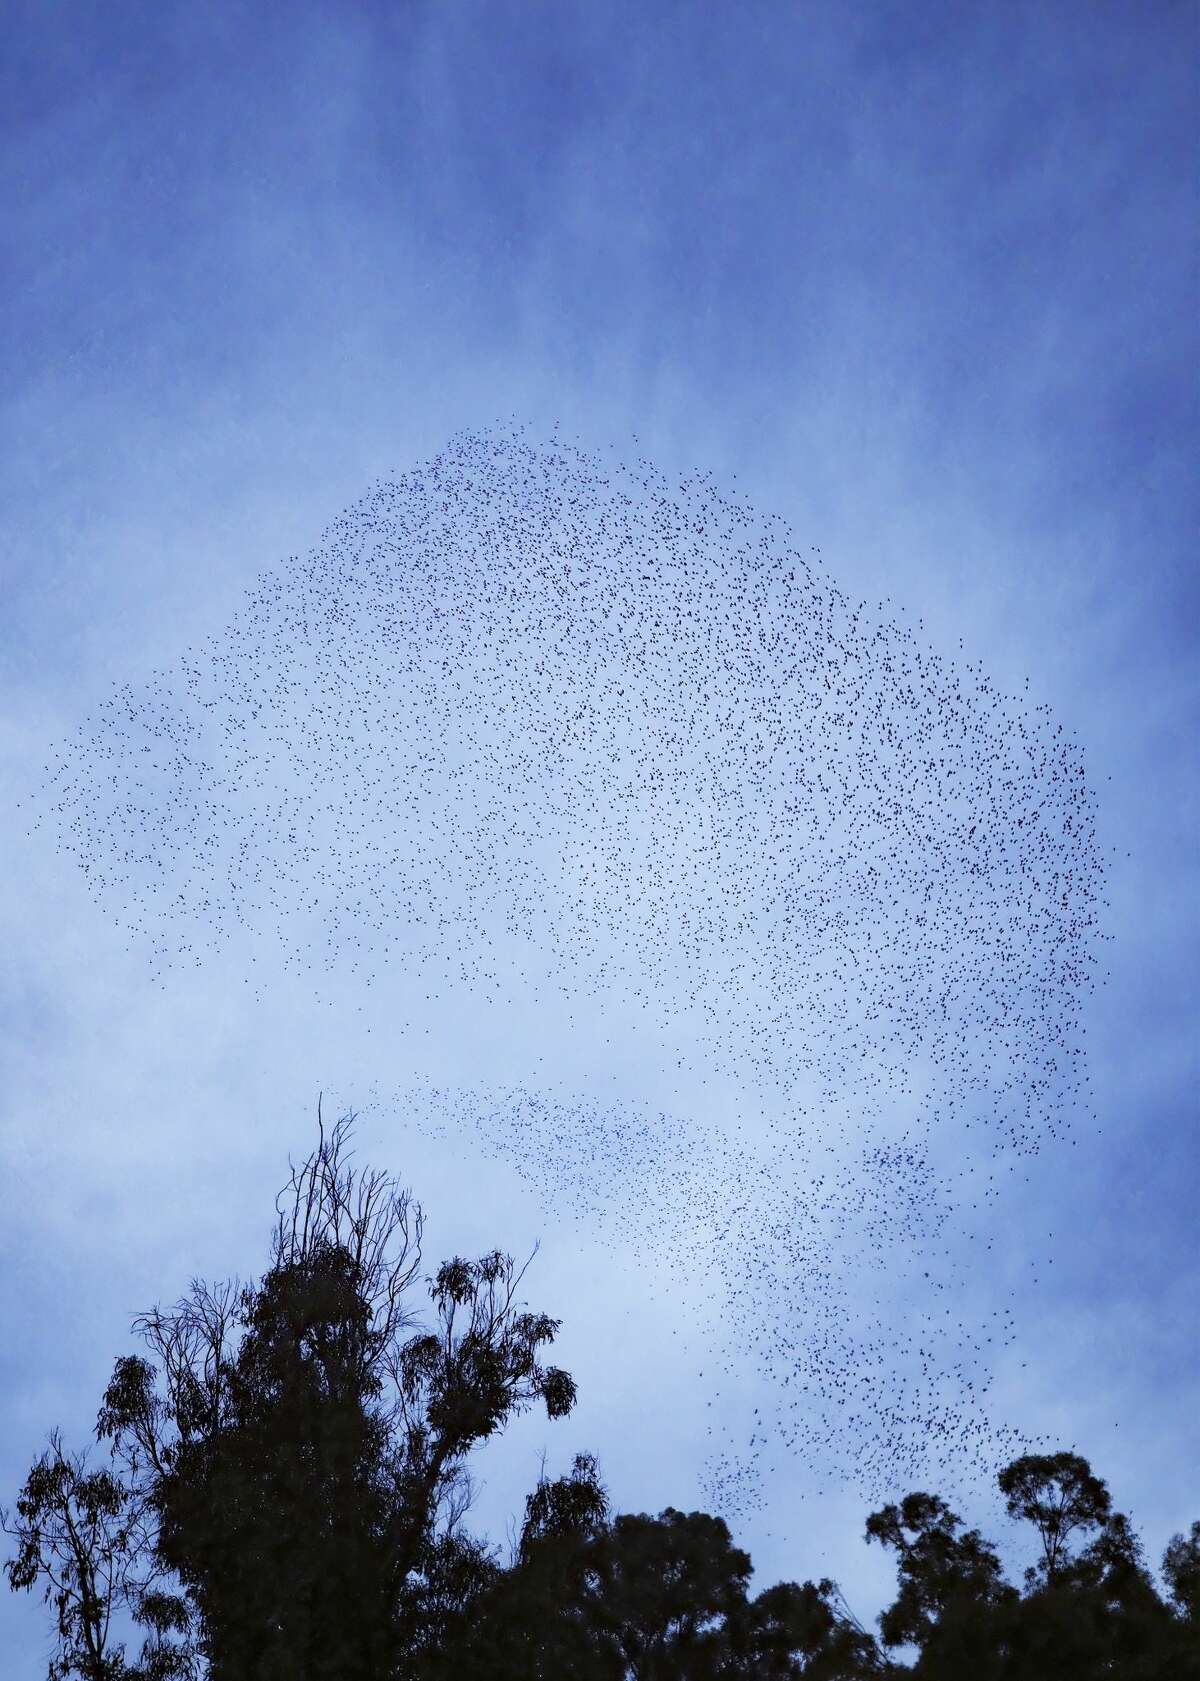 Thousands upon thousands - maybe even more than a million - birds have flocked together in murmurations at dusk above San Rafael, Calif.